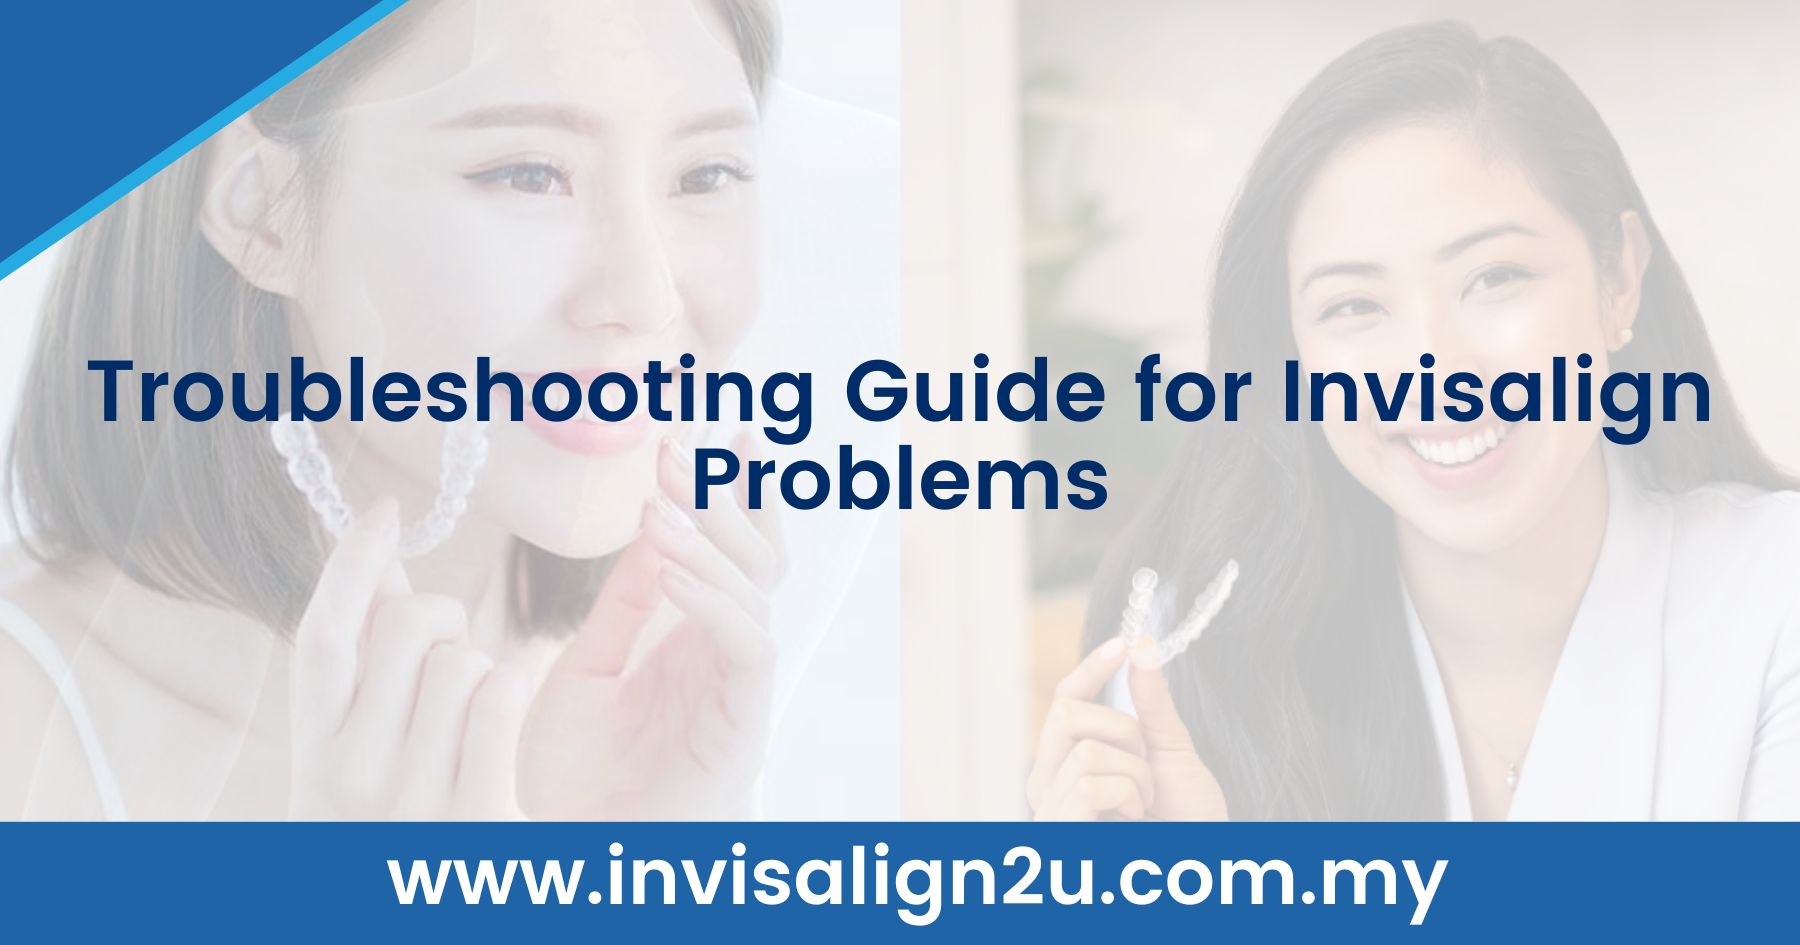 Troubleshooting Guide for Invisalign Problems